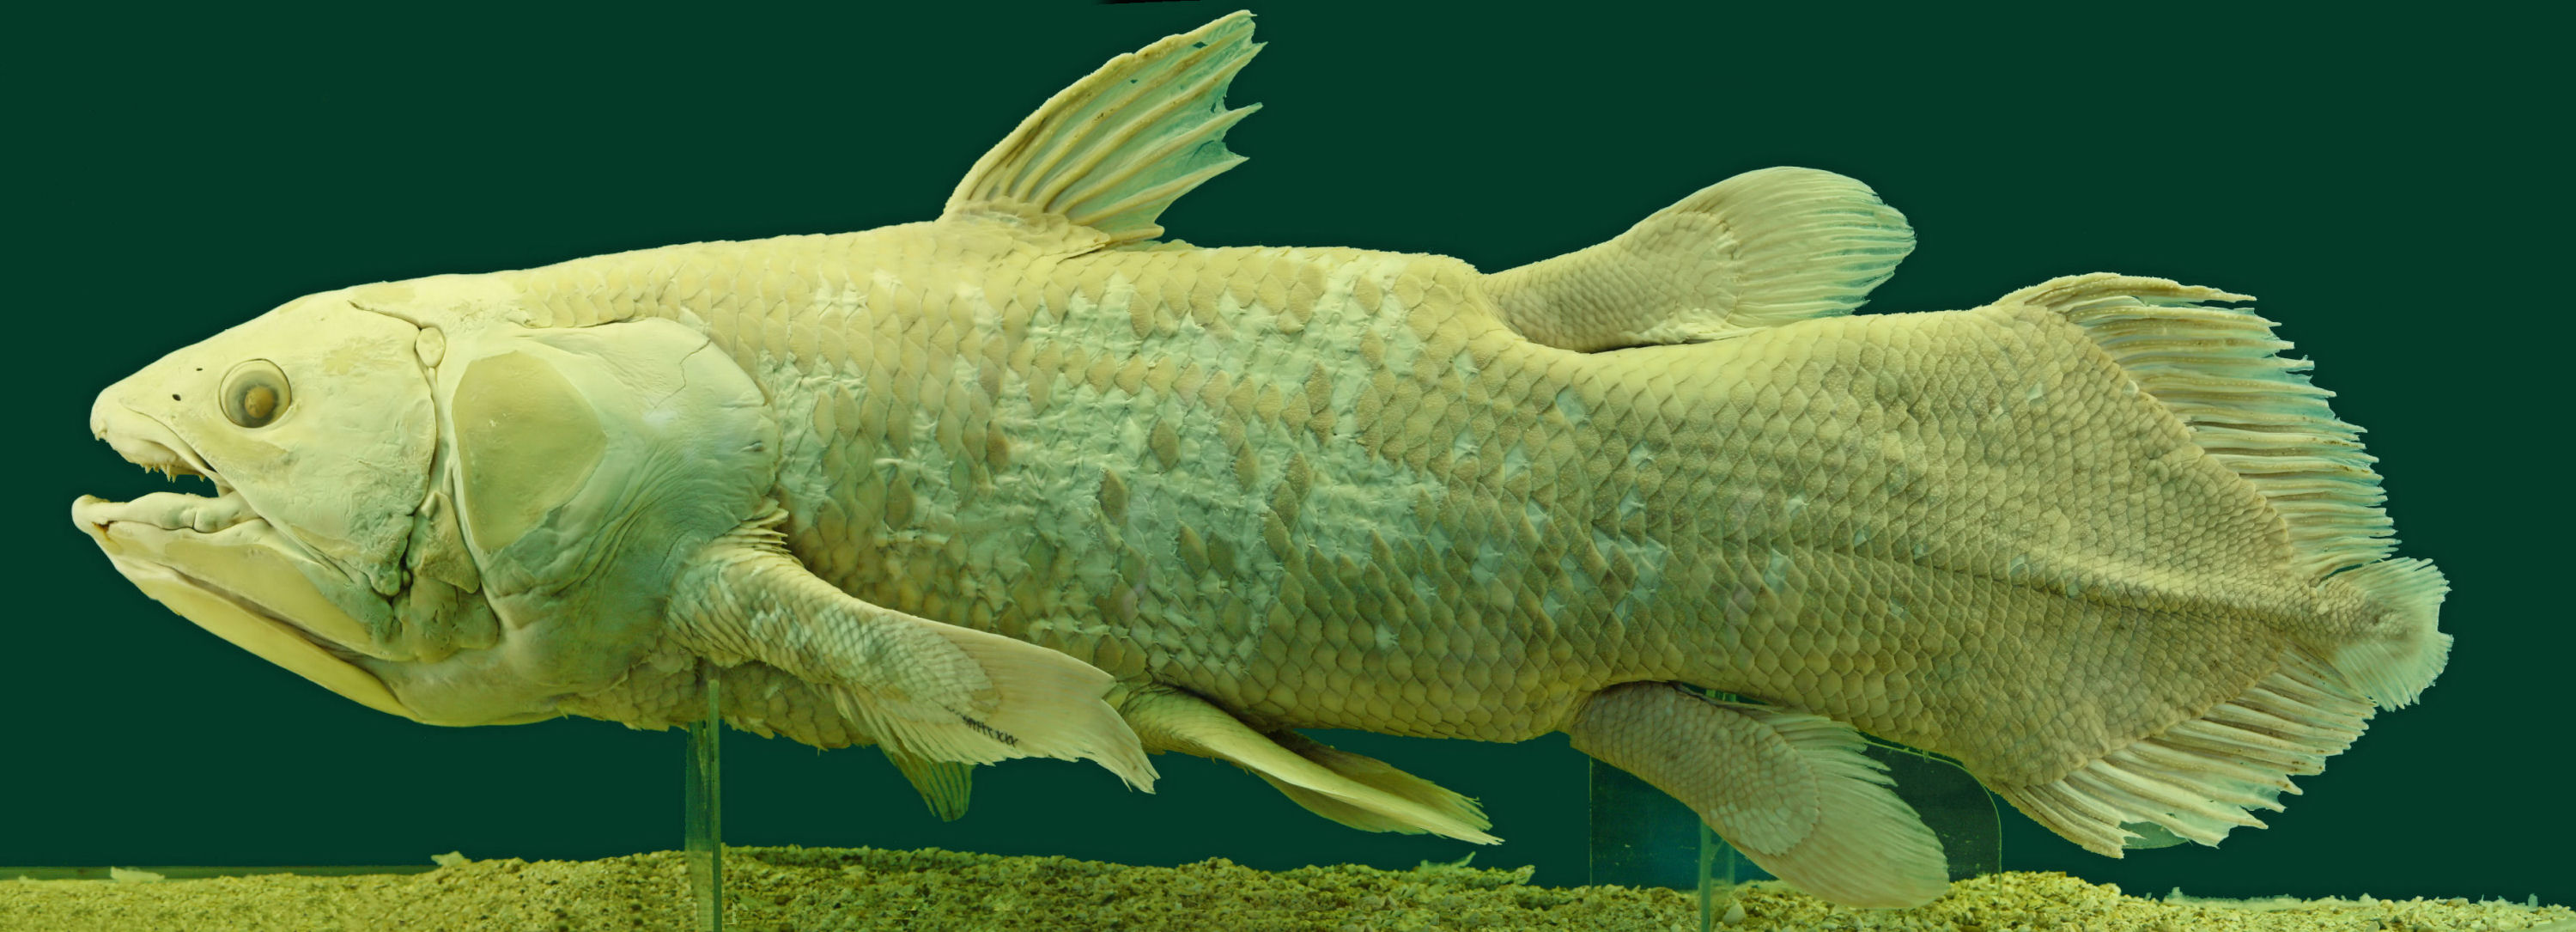 Coelacanth Photos And Wallpaper Nice Pictures